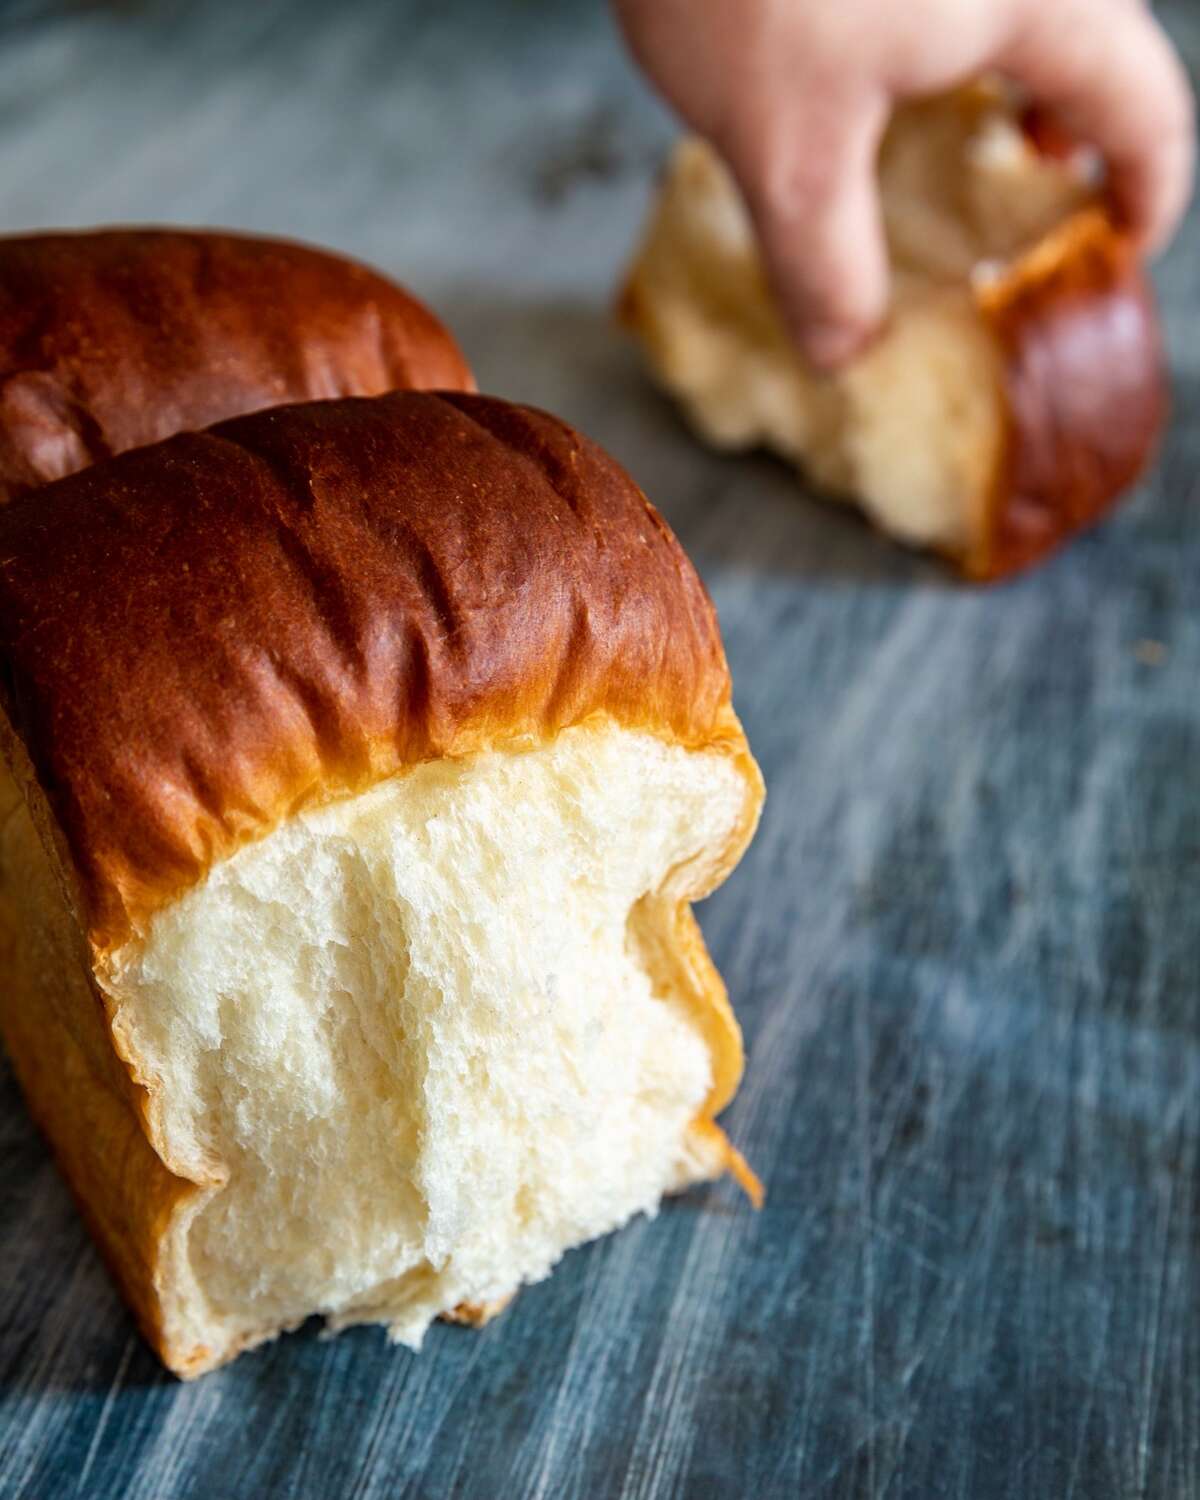 A soft loaf of milk bread, from Ppang Bakery, started by Sookyung Lee of Niskayuna.